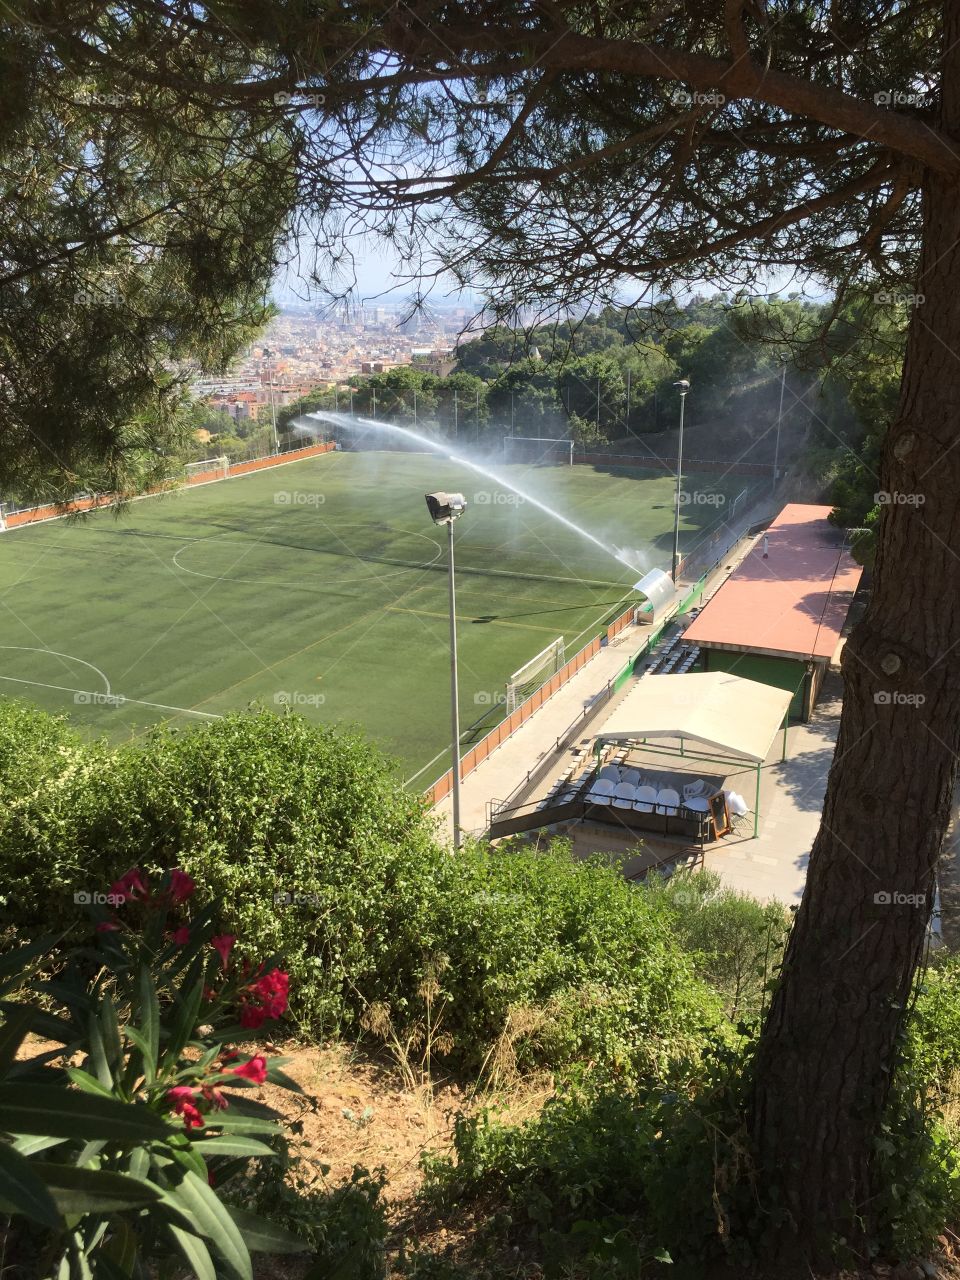 capturing a photo of watering football ground under park guell of Barcelona.